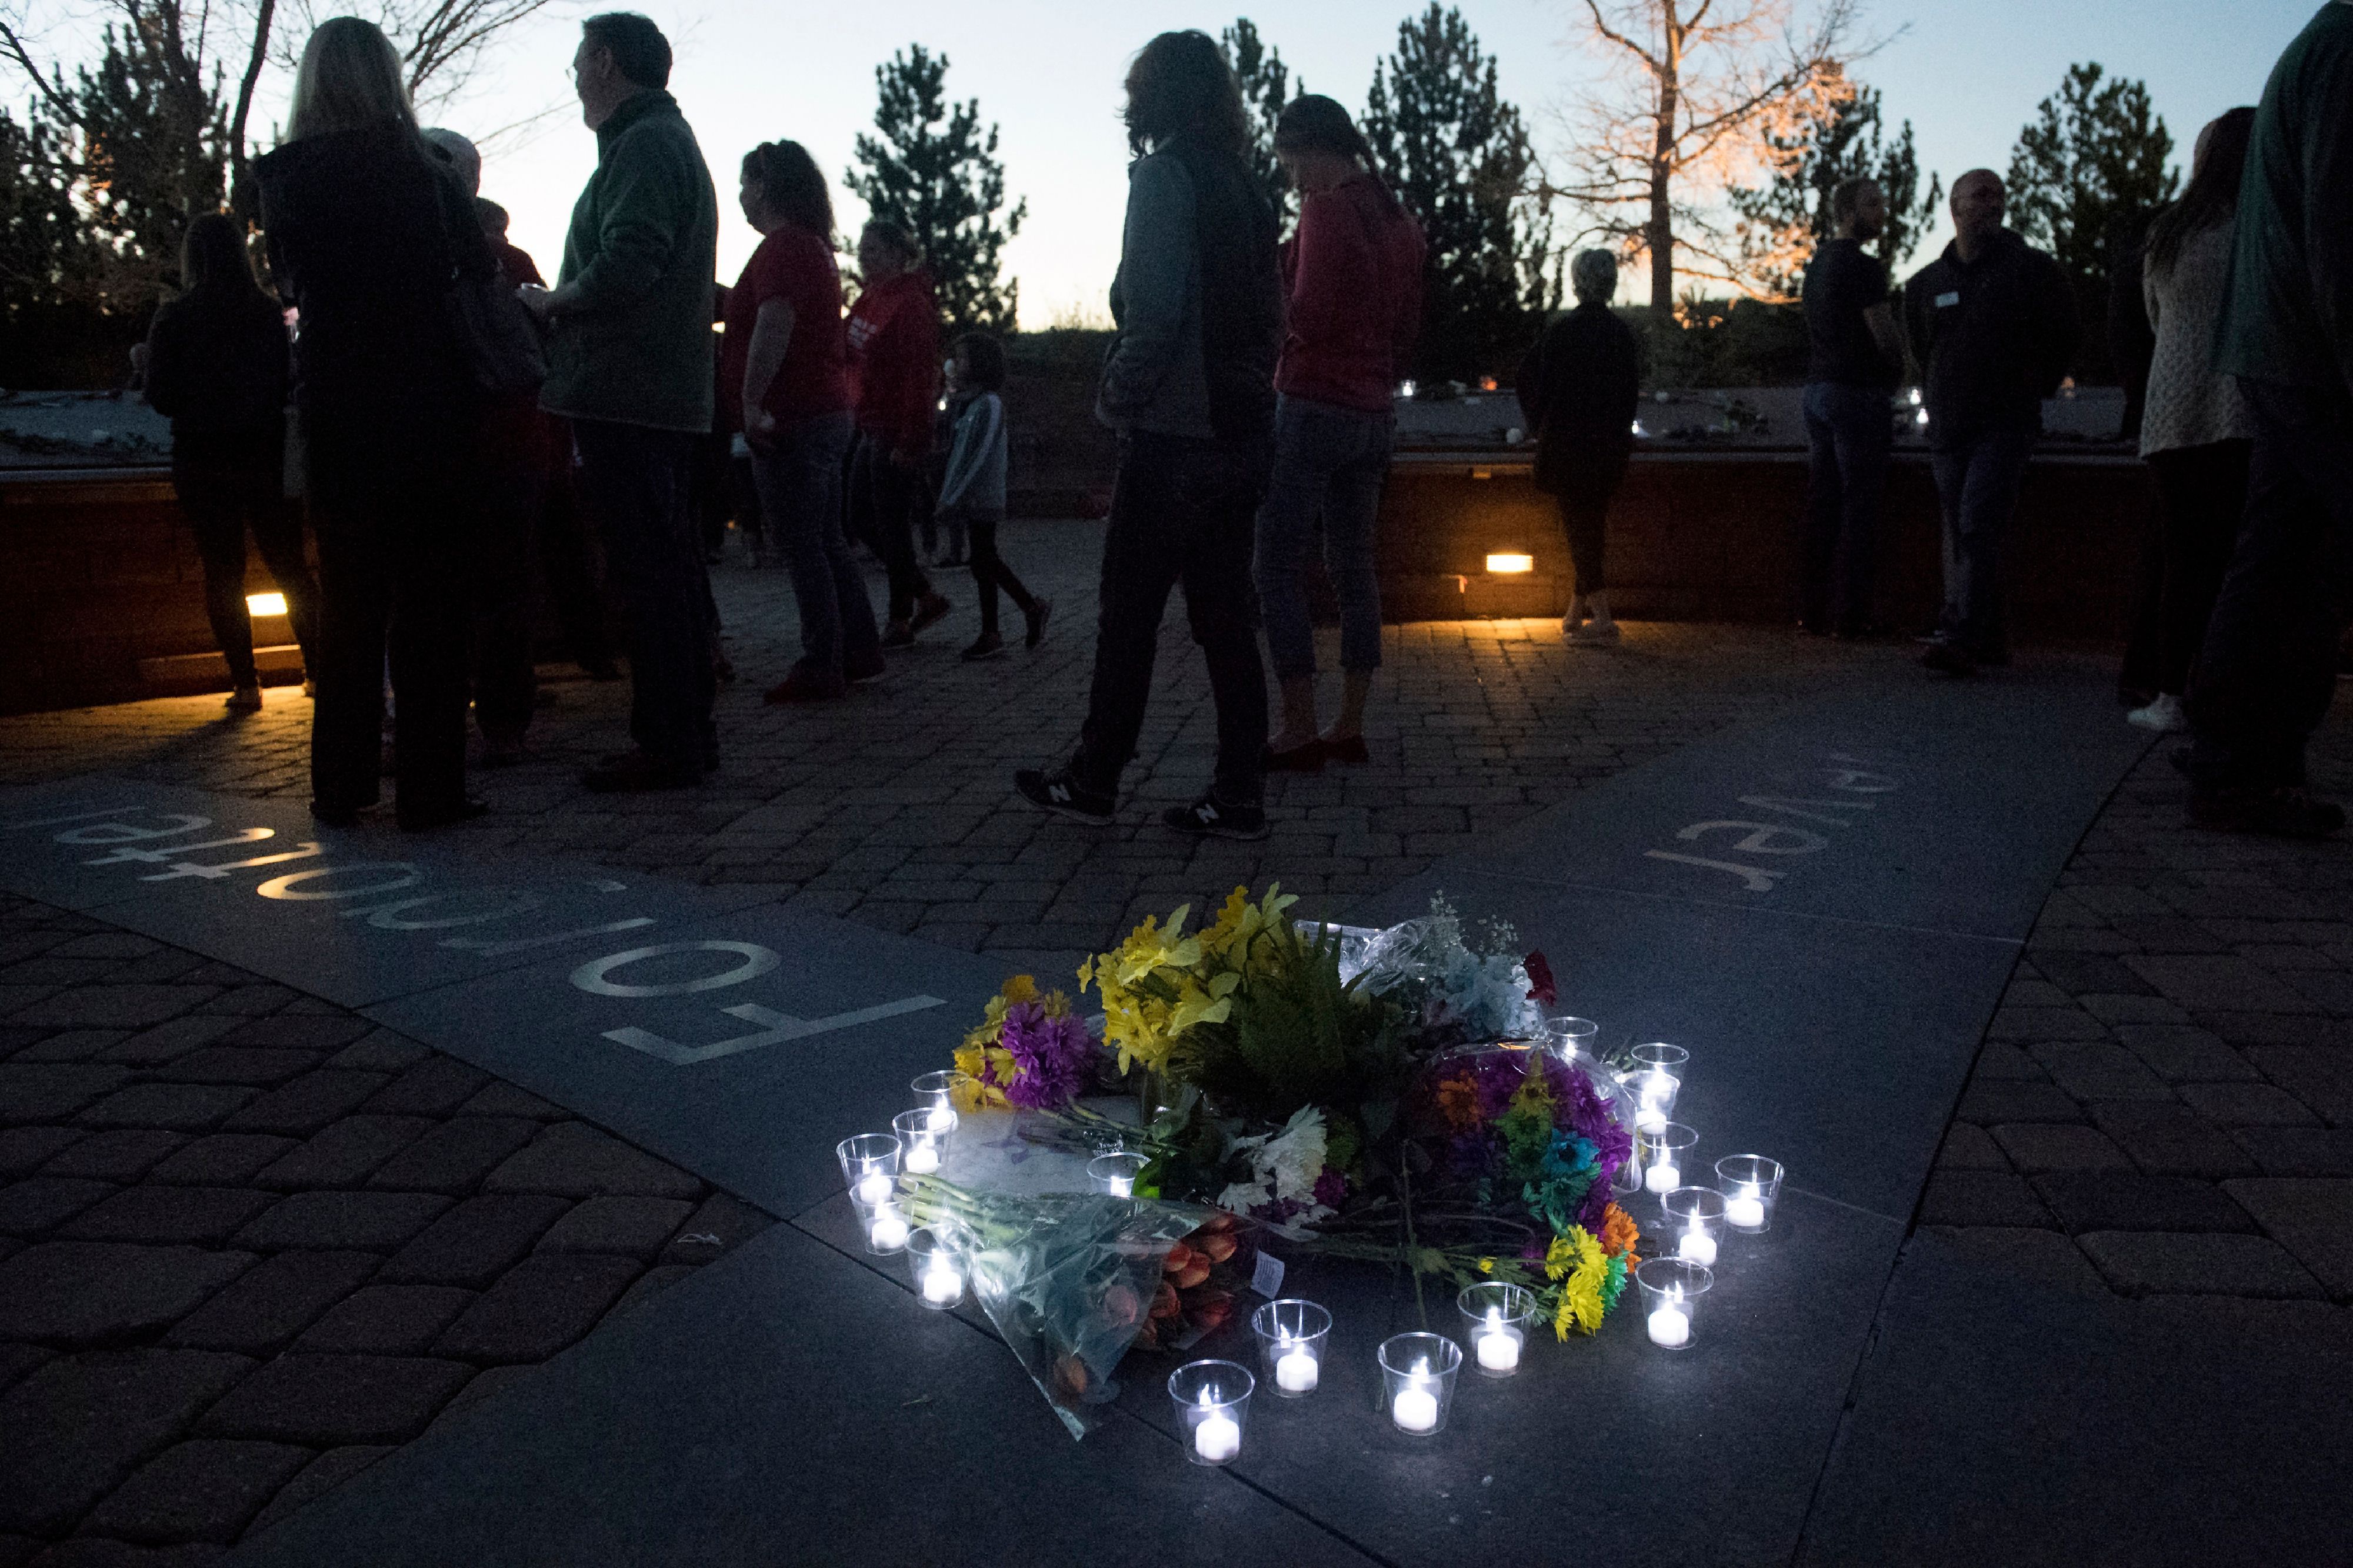 Candles wrap around a collection of flowers at the Columbine Memorial at Clement Park in Littleton, Colorado, during a community vigil.